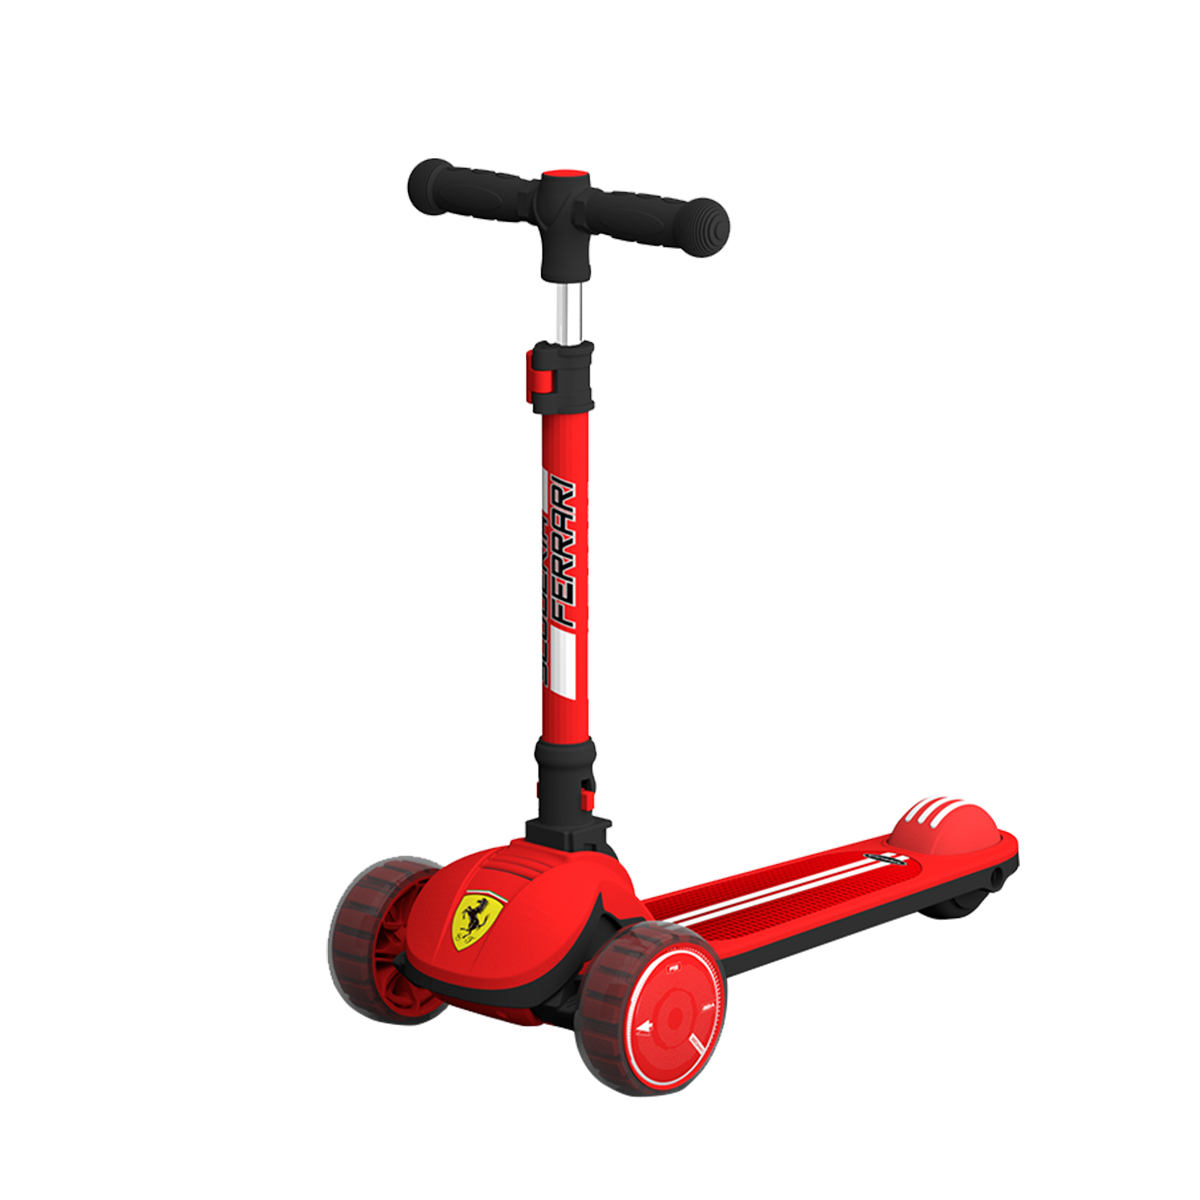 FERRARI FXK108 FOLDABLE TWIST SCOOTER FOR KIDS WITH ADJUSTABLE HEIGHT, LED LIGHTS (MEDIUM), AGED 3 to 10